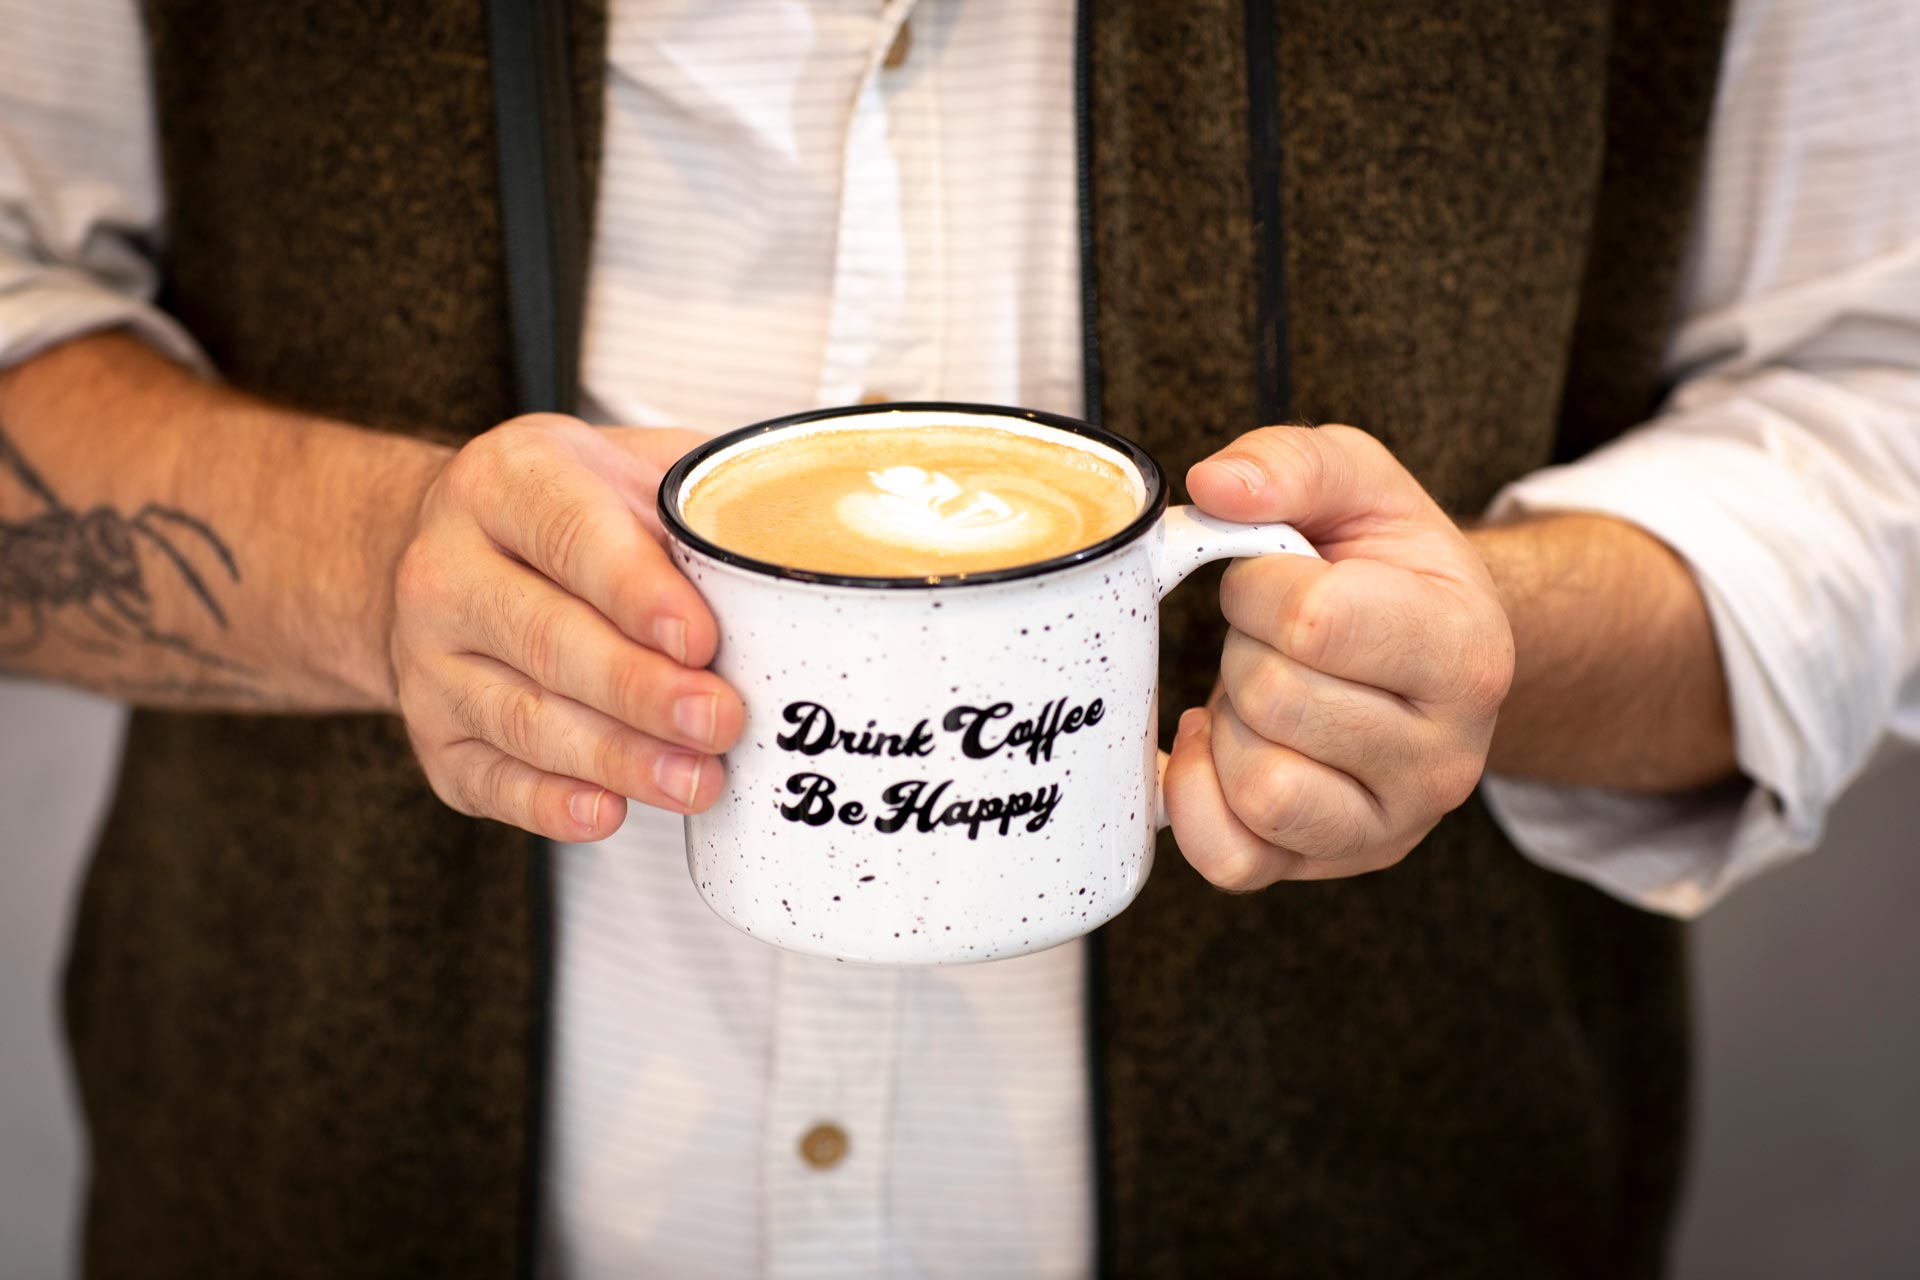 Photograph of an Austin Java patron holding a cup of coffee that reads "Drink Coffee Be Happy"